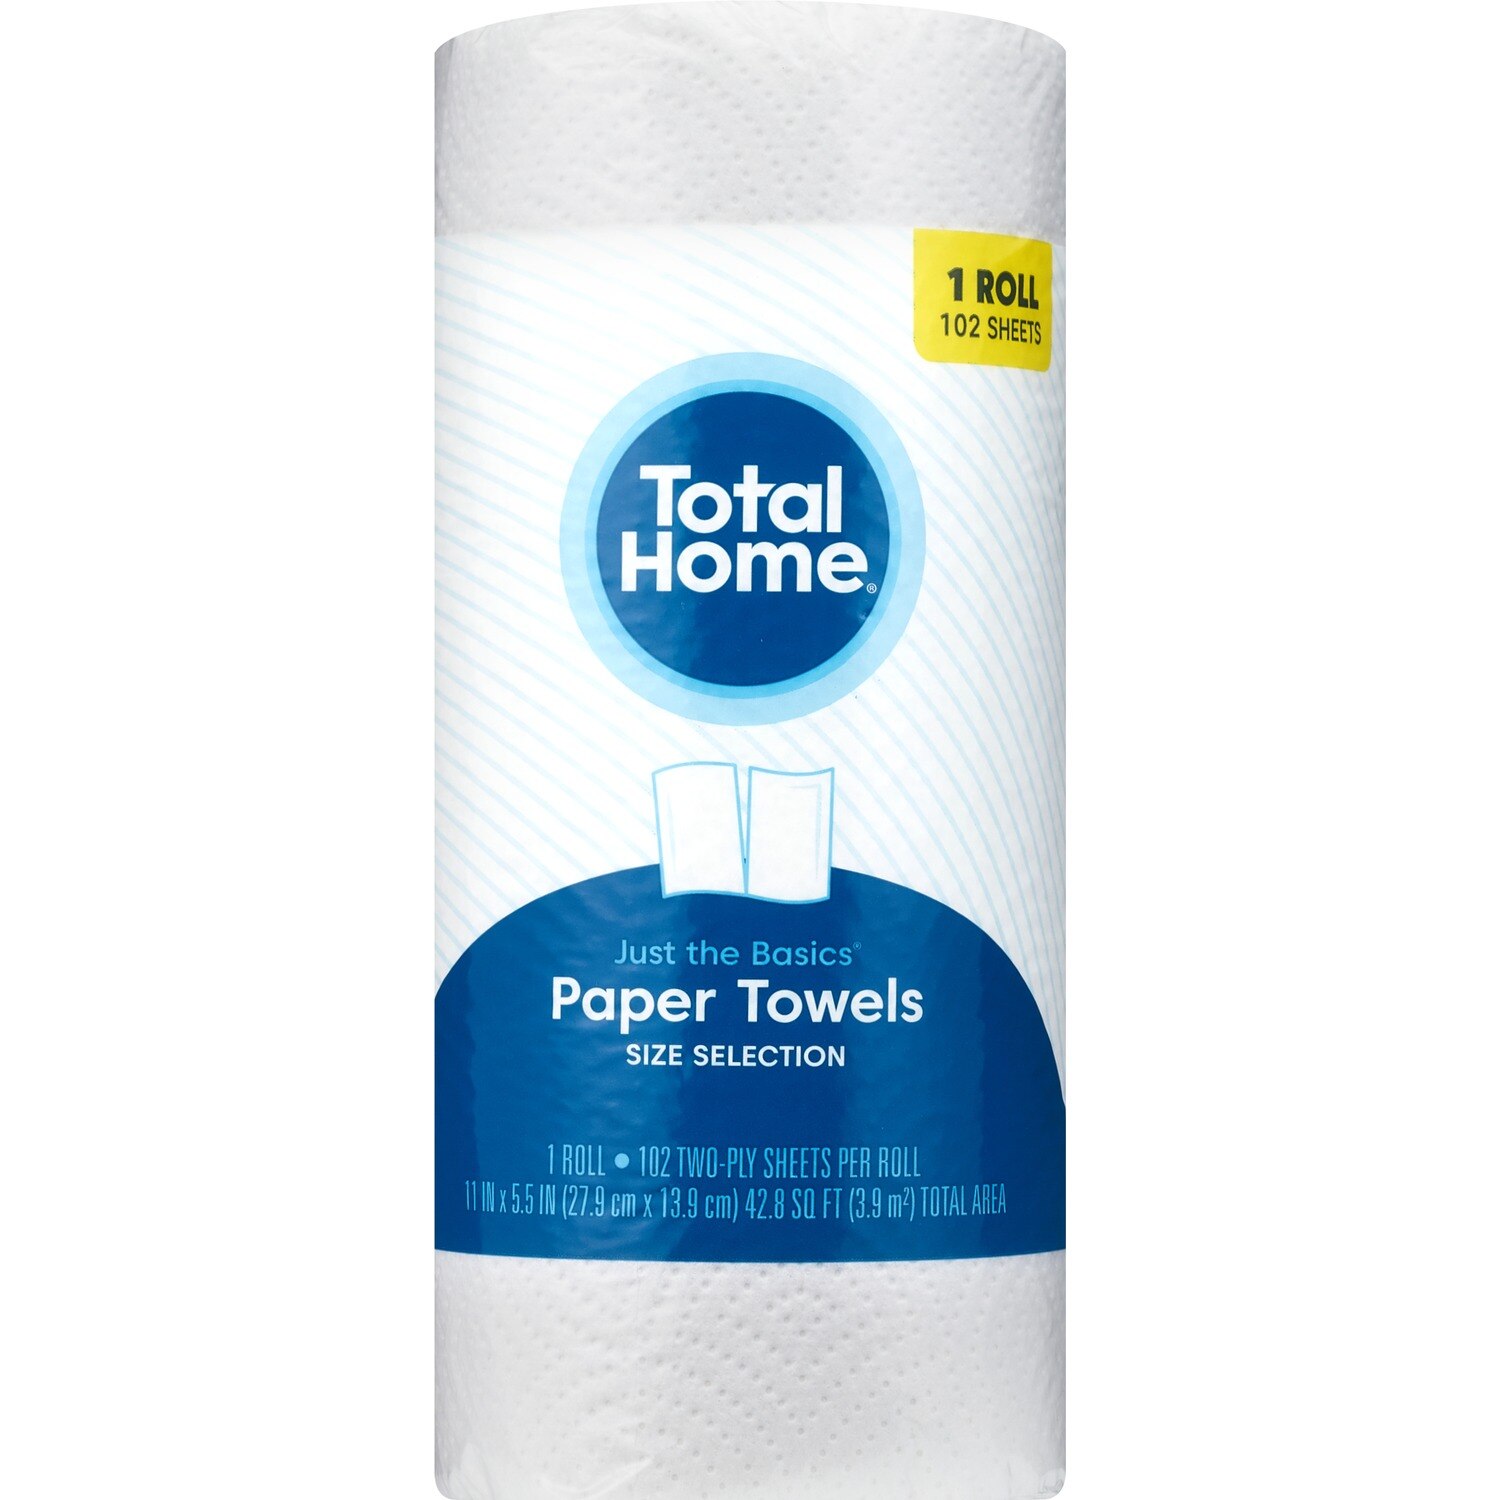 Total Home Just The Basics Paper Towels, 102 Sheets